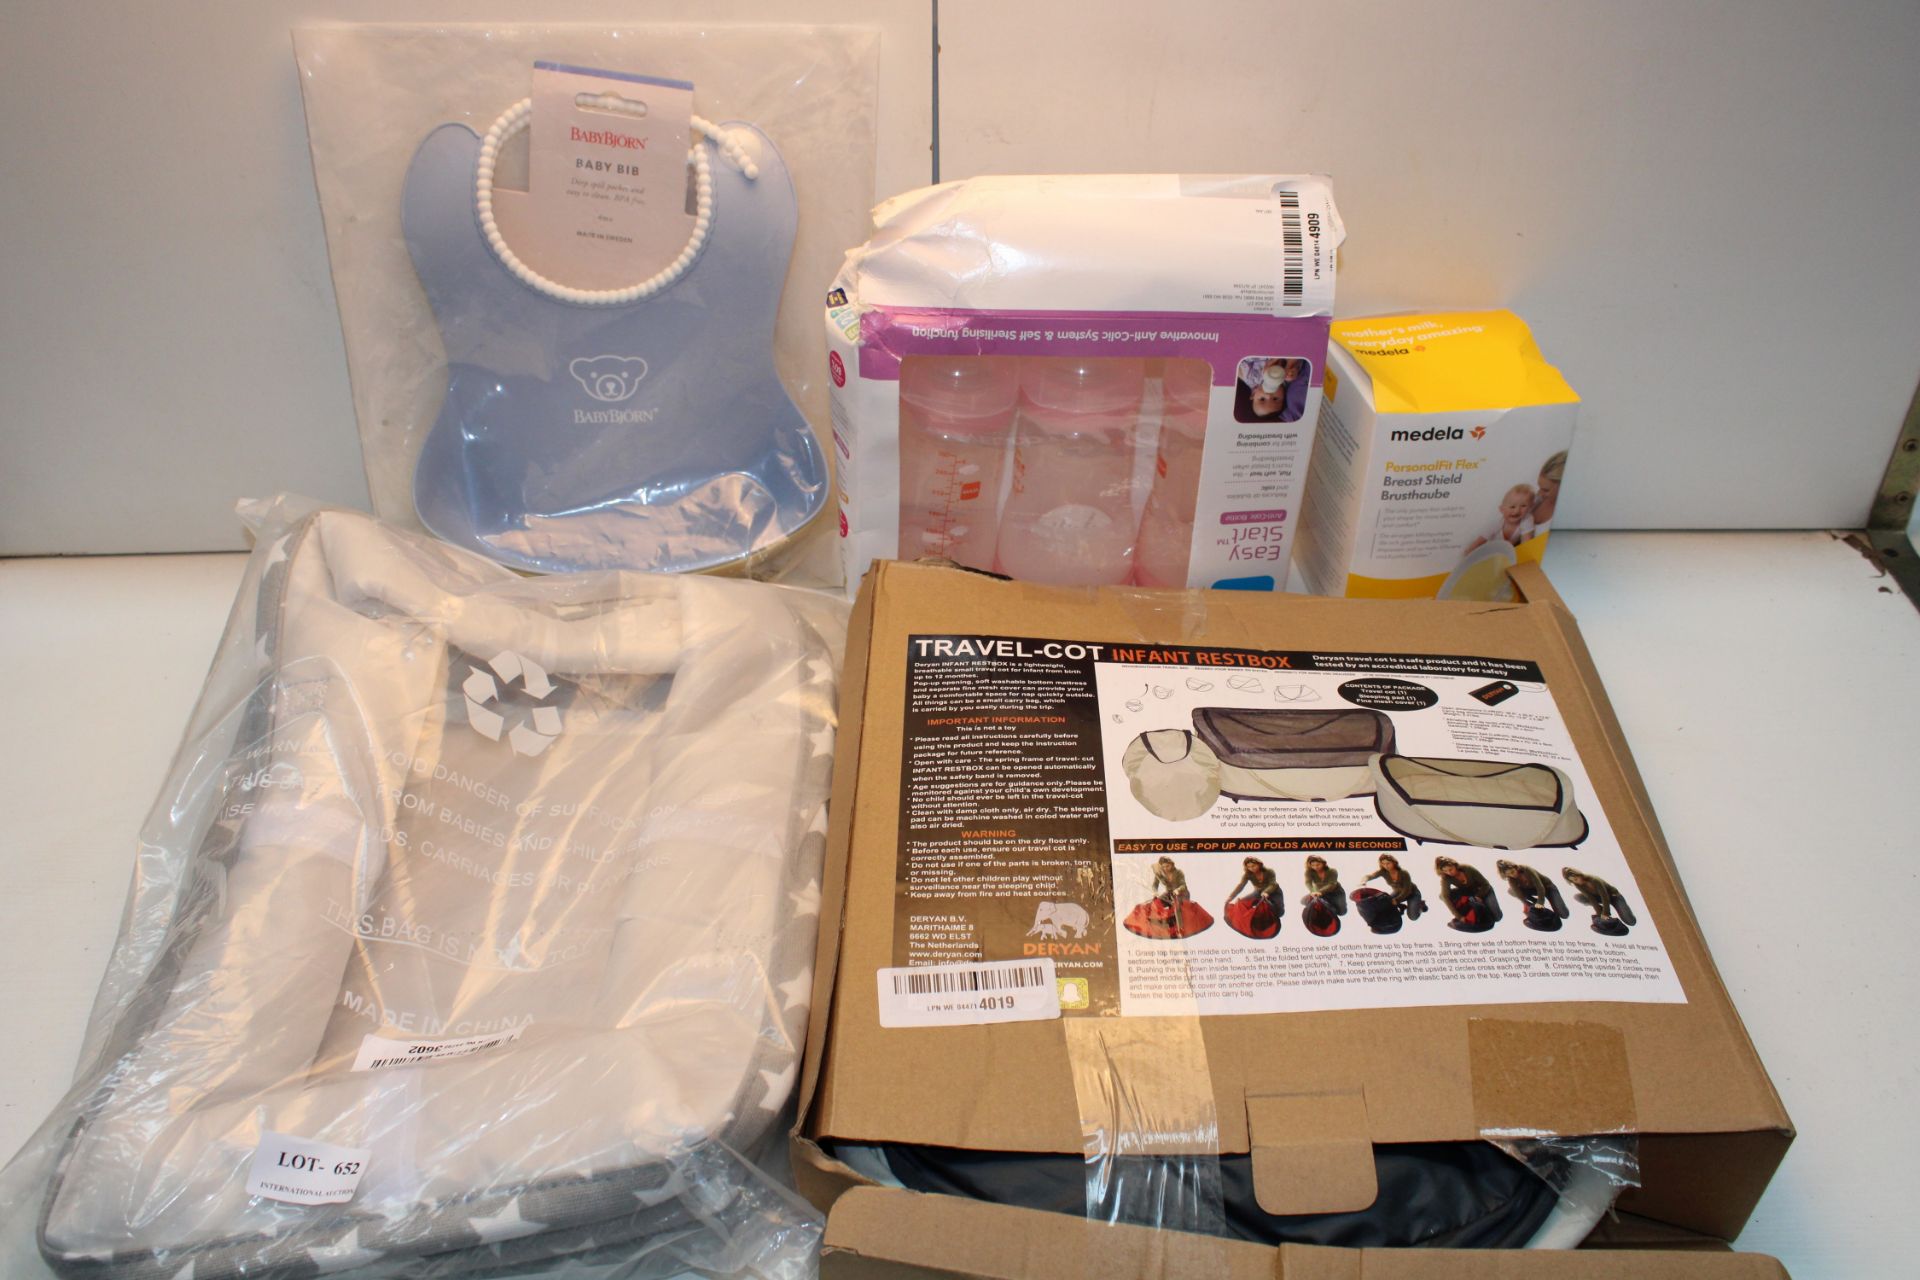 ASSORTED ITEMS TO INCLUDE MEDELA BREAST SHEILD, MAM BOTTLES, PLASTIC BIBS & OTHER Condition